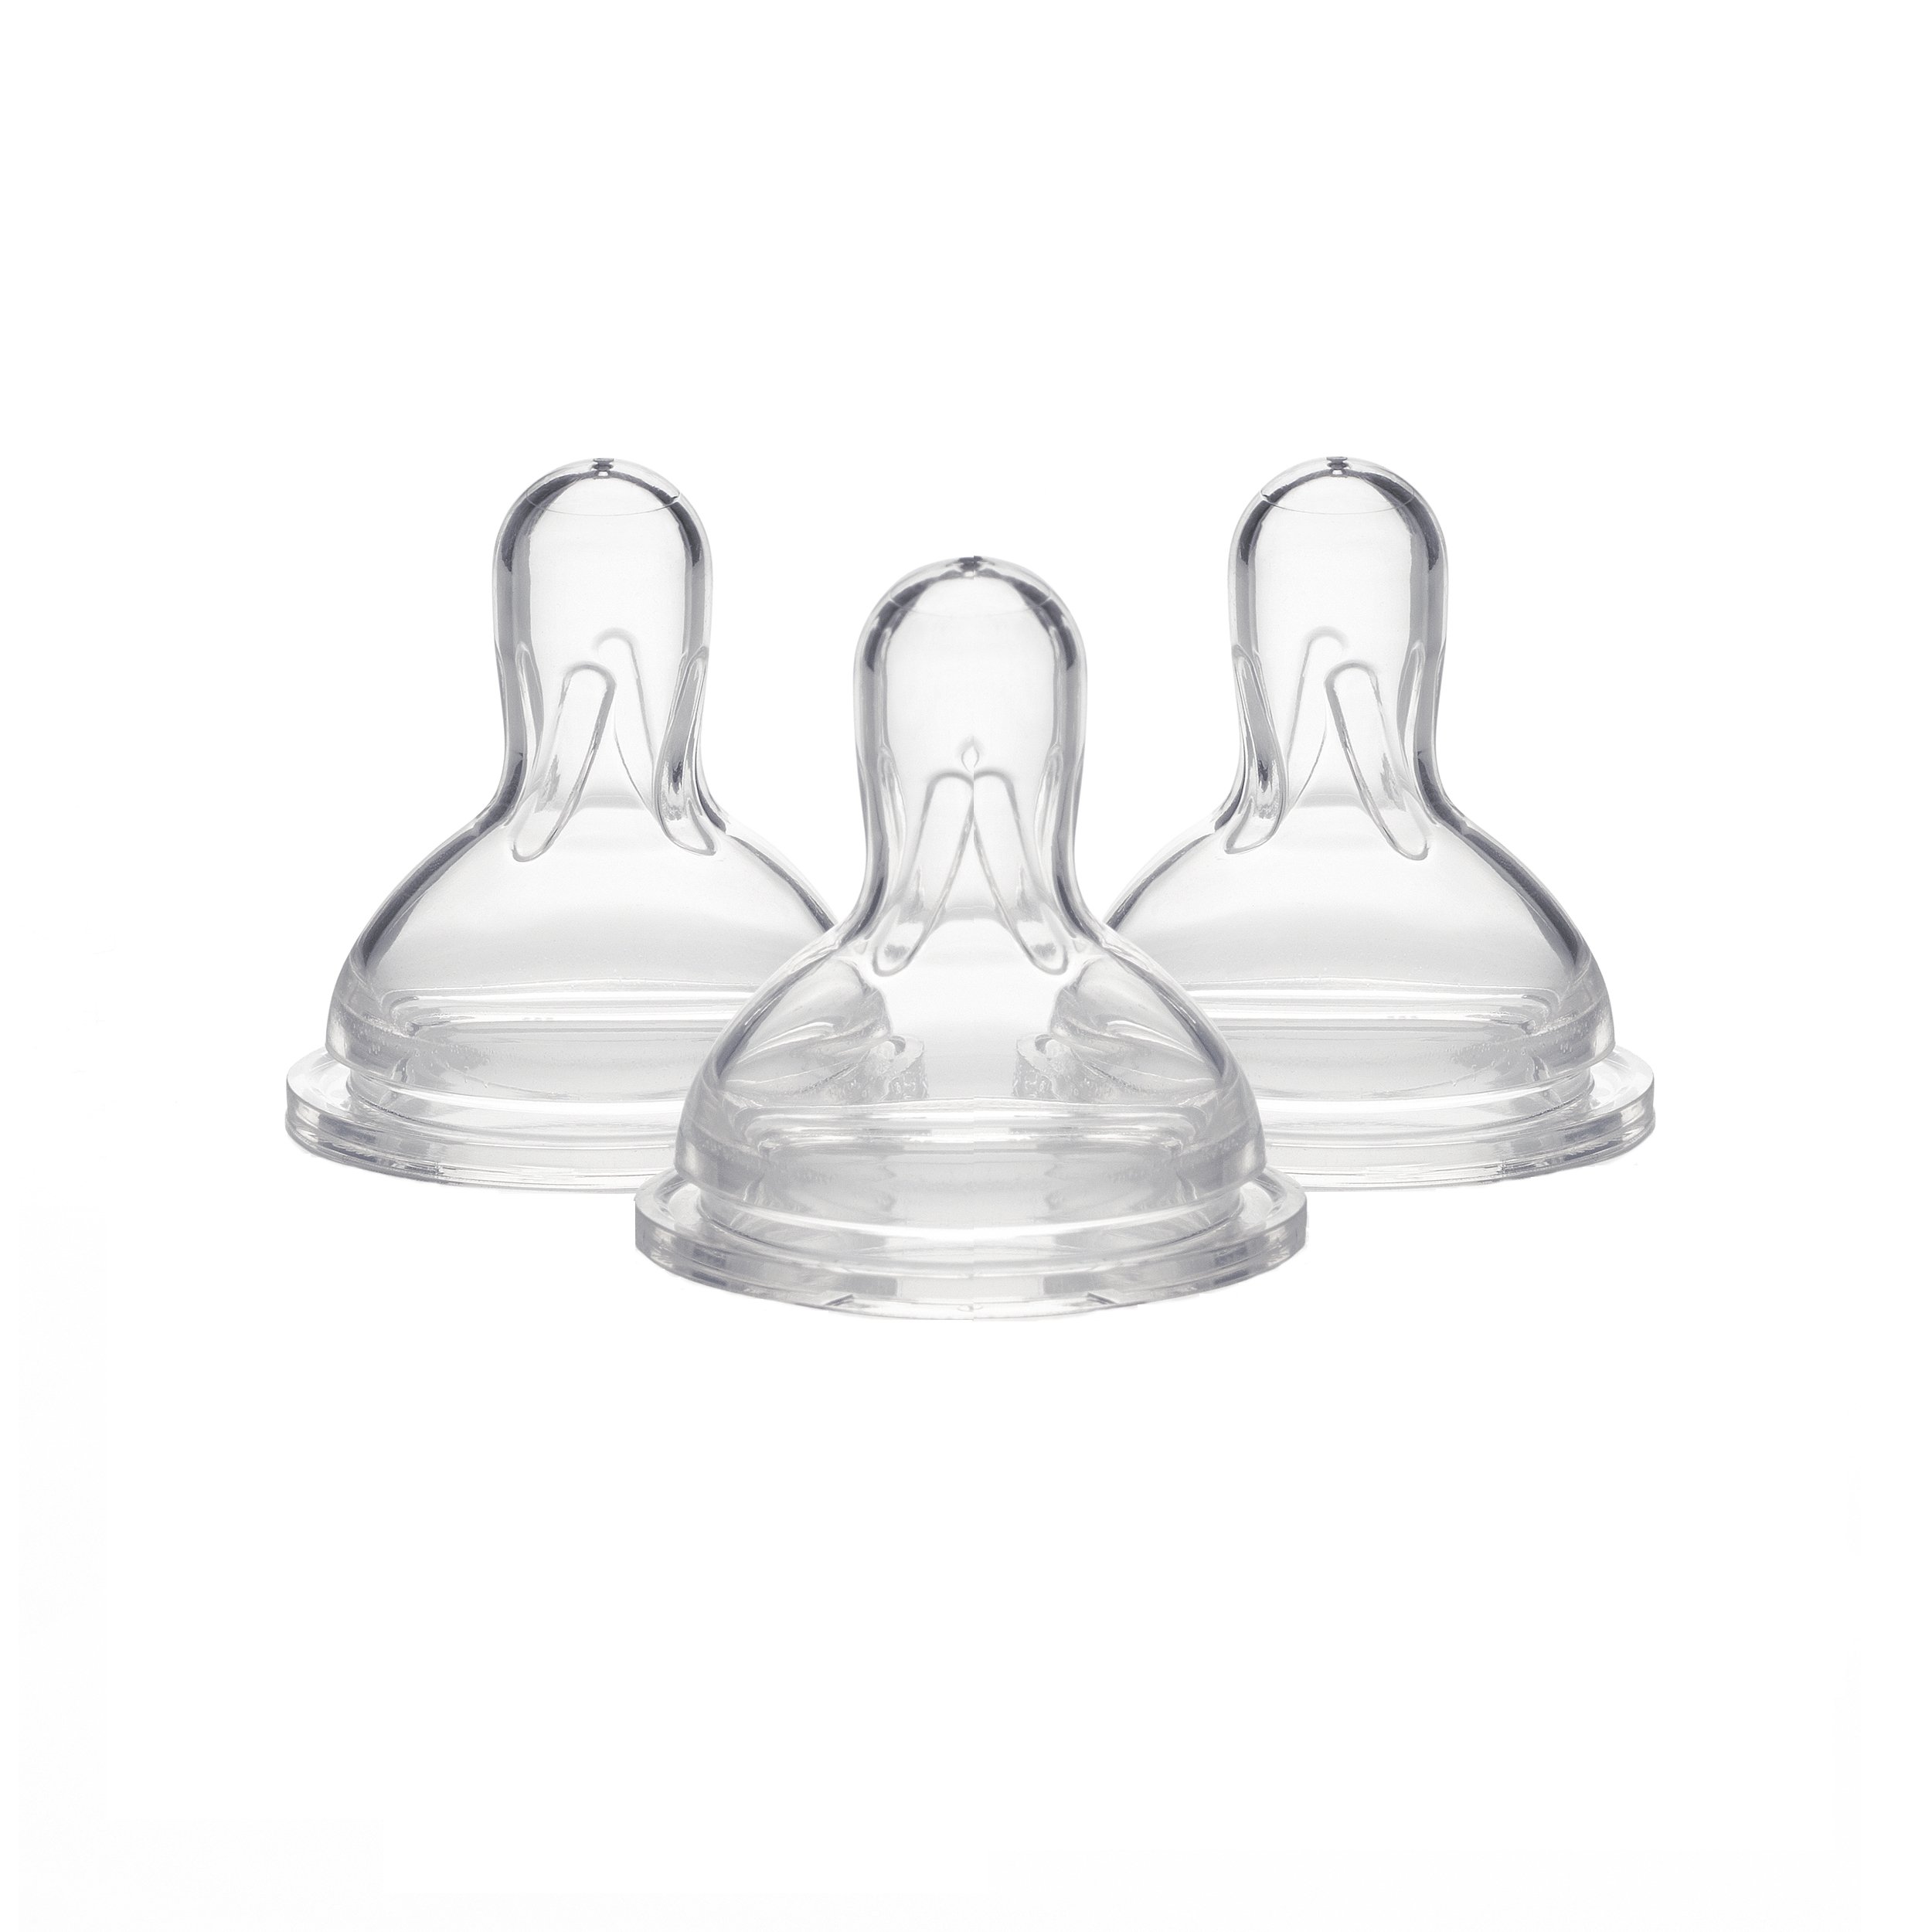 Medela Slow Flow Bottle Nipples with Wide Base, Baby Newborns Age 0-4 Months, Compatible with All Medela Breast Milk Bottles, Made Without BPA, 3 Count (Pack of 1)